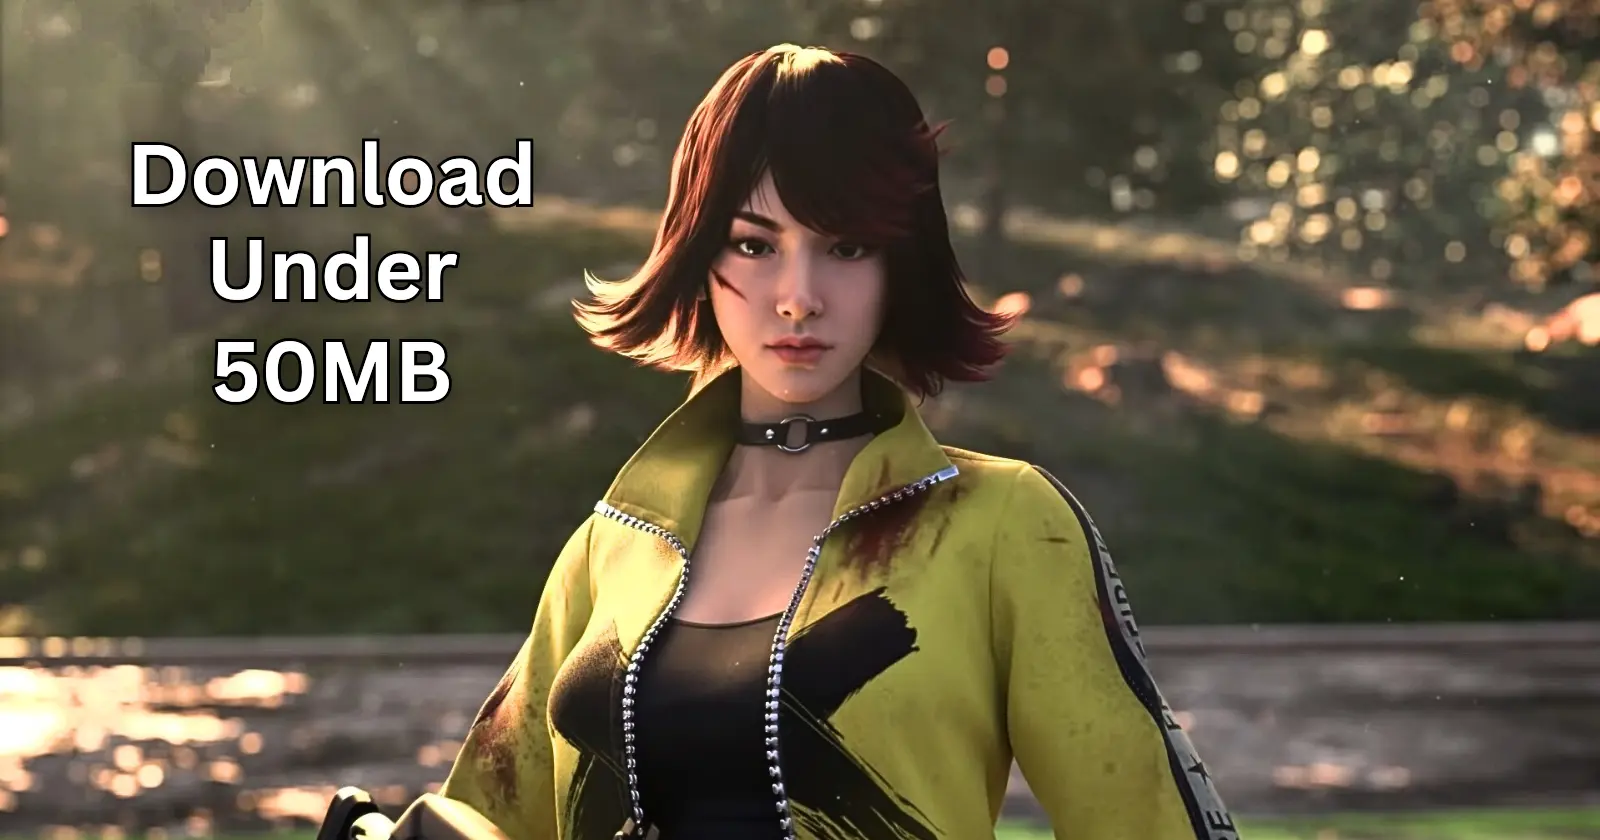 Kelly, a female character in a sunlit park, donning a yellow jacket. 'Download under 50 MB' is written beside her.